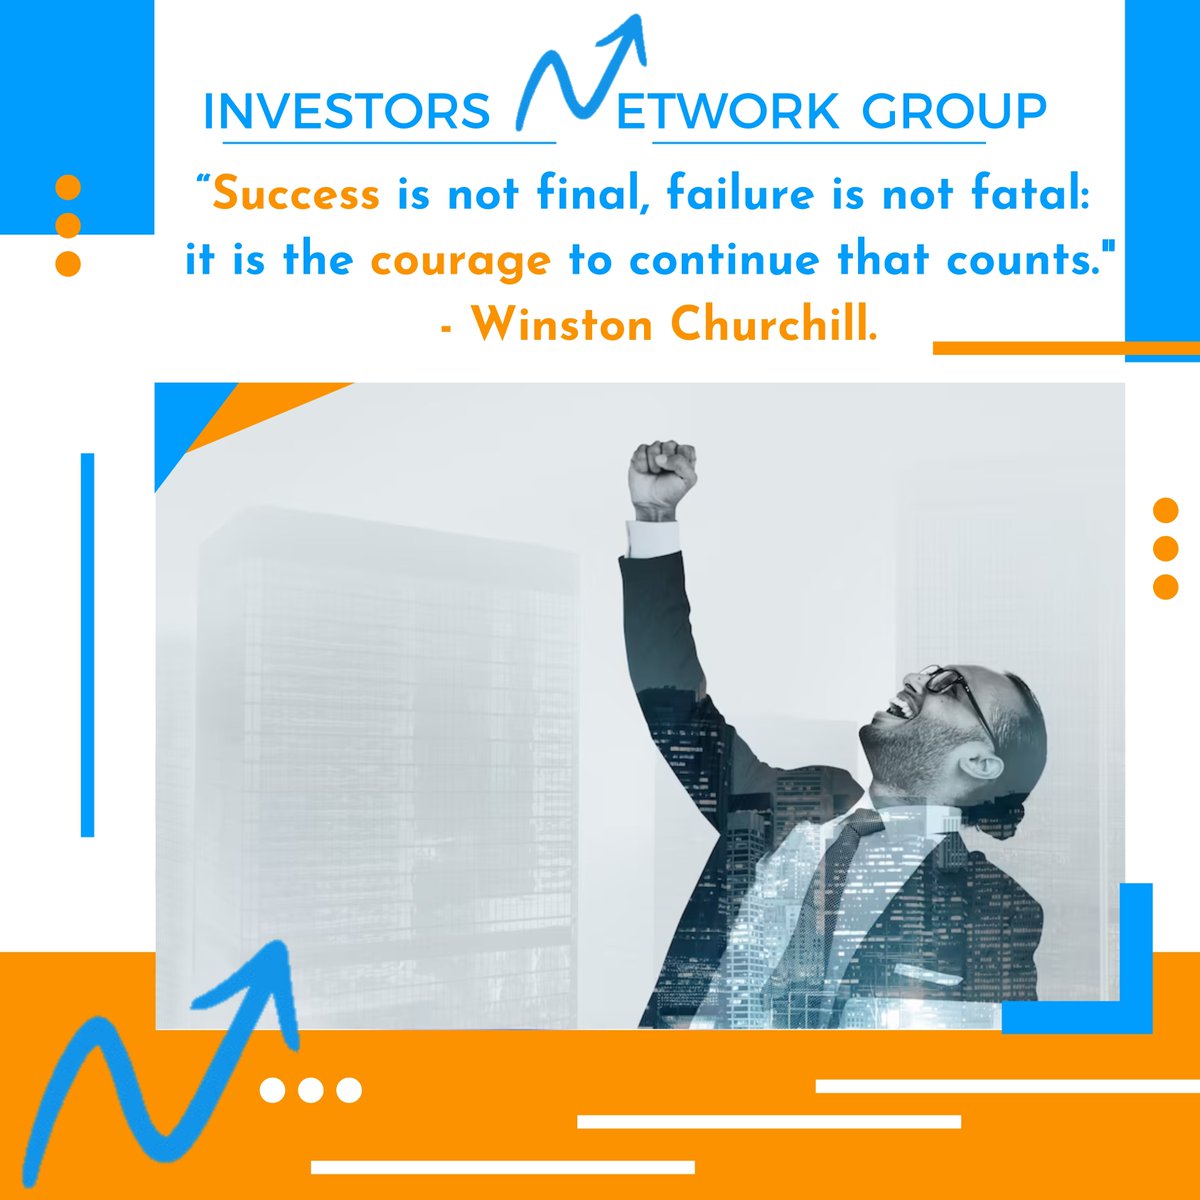 A great reminder from Winston Churchill that success is not the end of the road, nor is failure the end of the journey. It's the courage to keep going that truly counts.

#startupfunding #fundingstrategies #entrepreneurmindset #venturecapital #investorsnetworkgroup